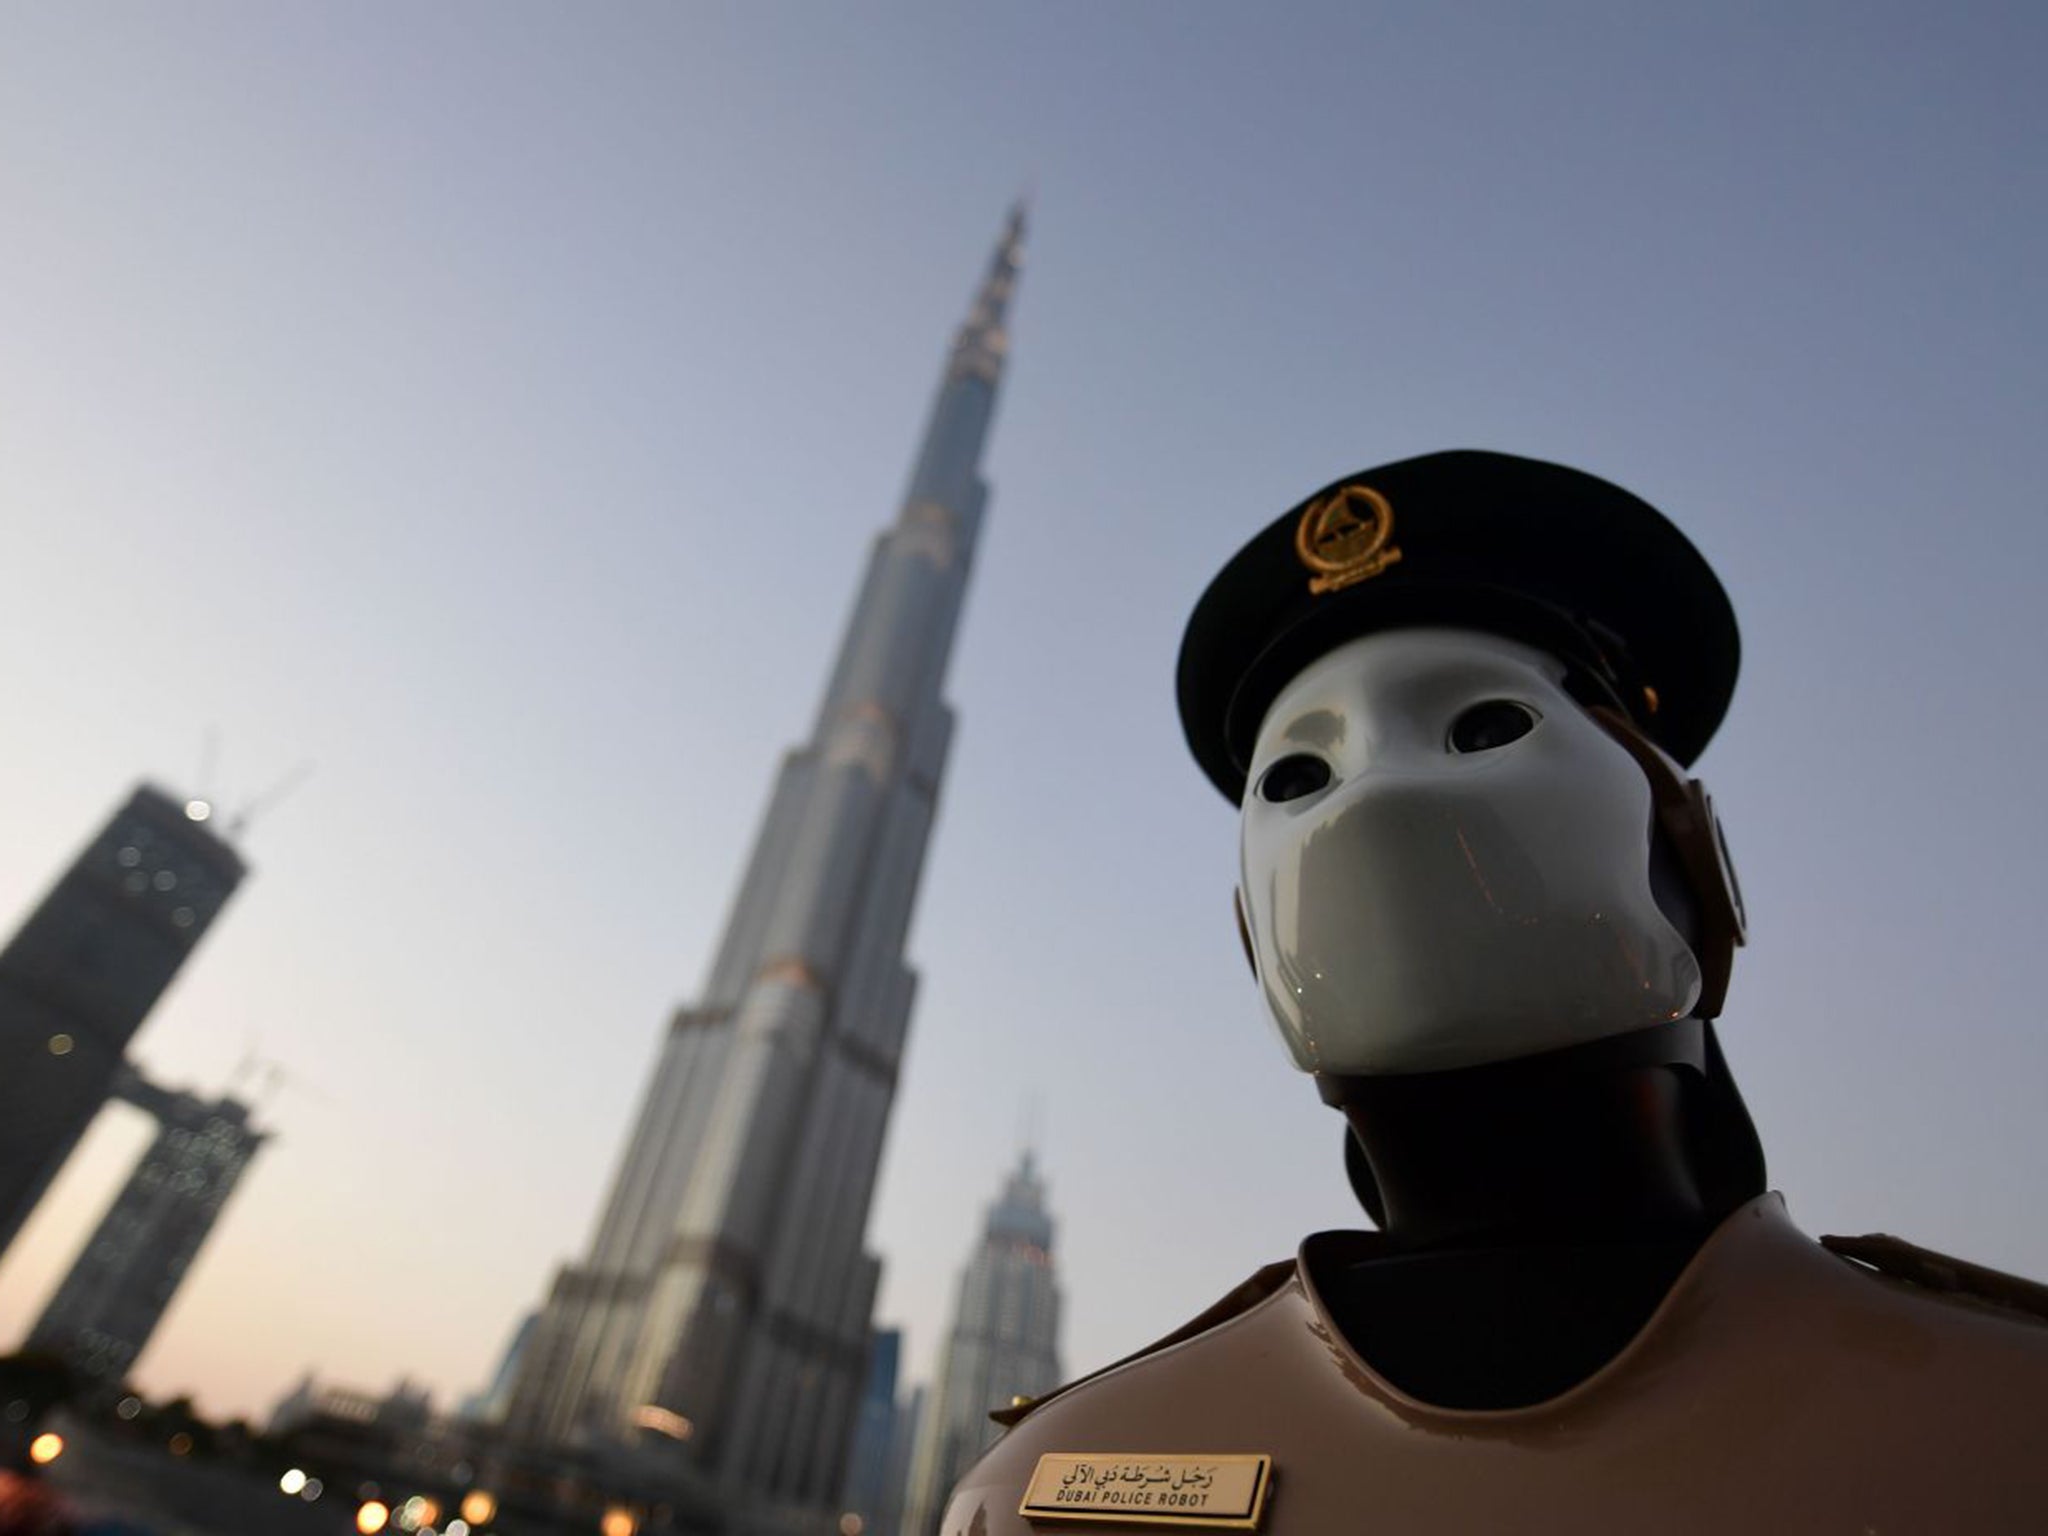 The world’s first operational police robot stands to attention near the Burj Khalifa in Dubai